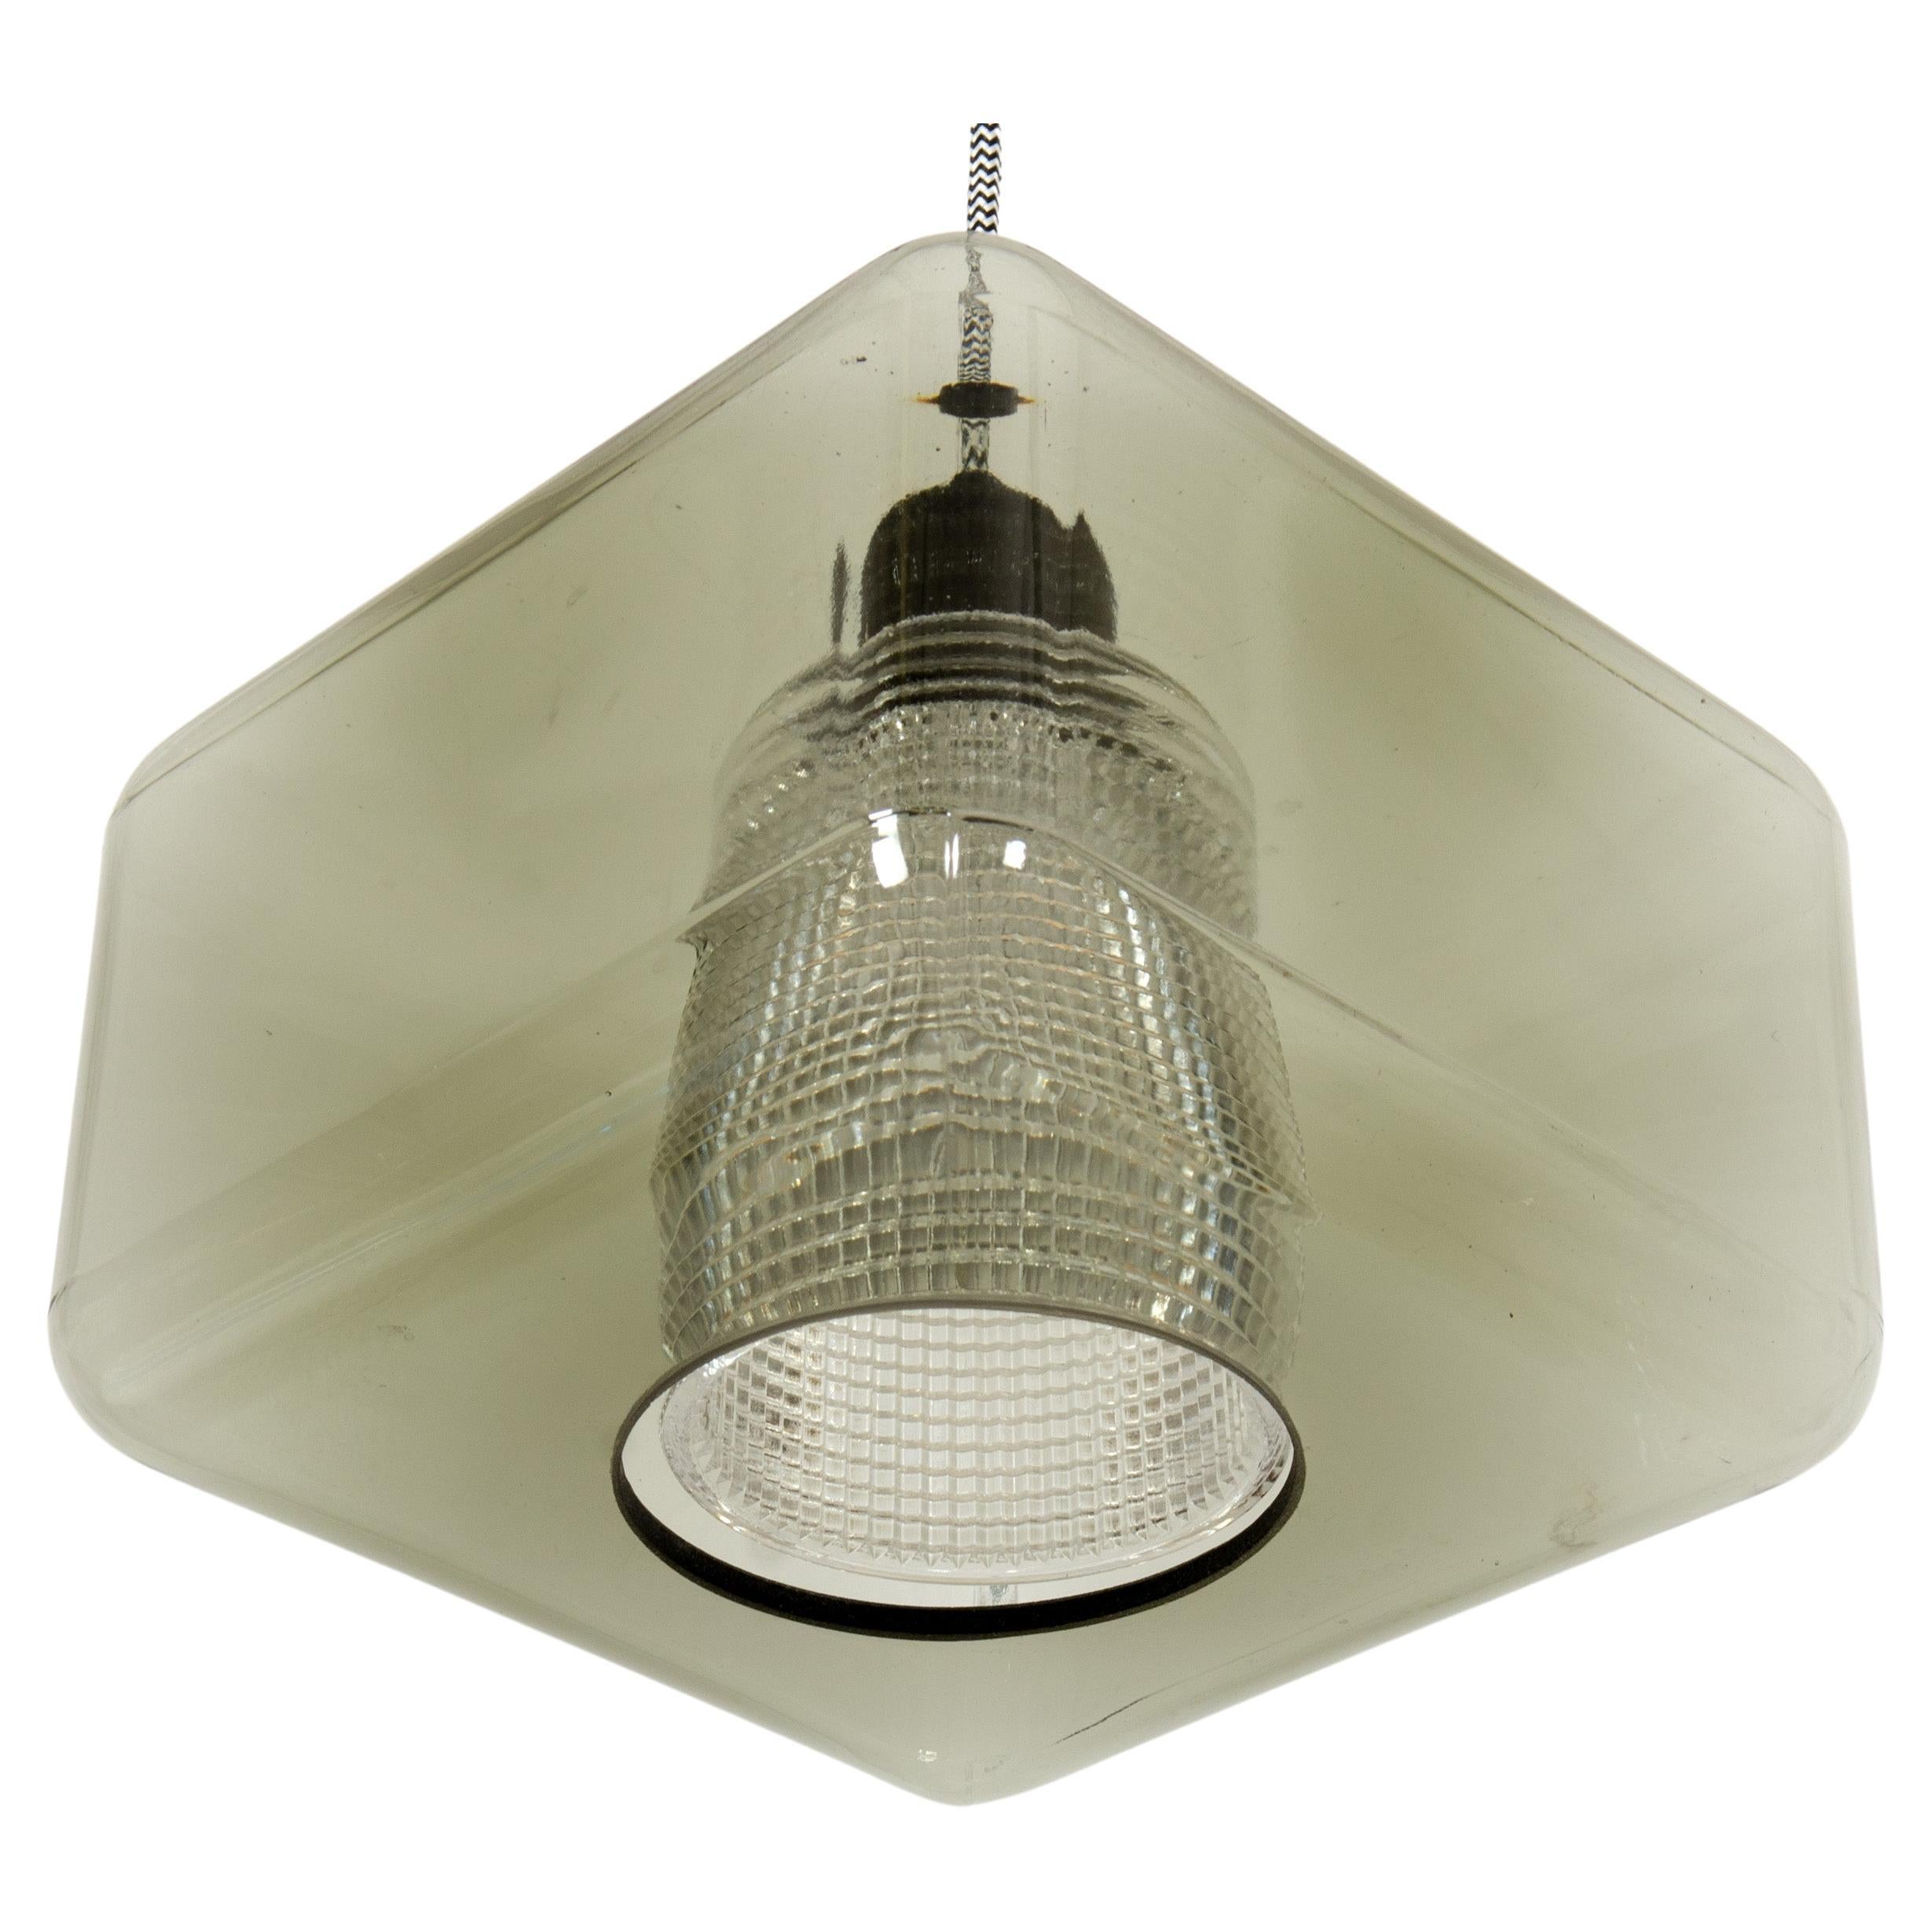 Square shaped glass and clear glass (inside) pendant lamp. Designed in the 1960s by Carl Fagerlund for  Orrefors Glassworks in Sweden. Light grey tinted glass outer cup with a cylinder internal diffuser in clear pressed glass. 
Rewired. Very good